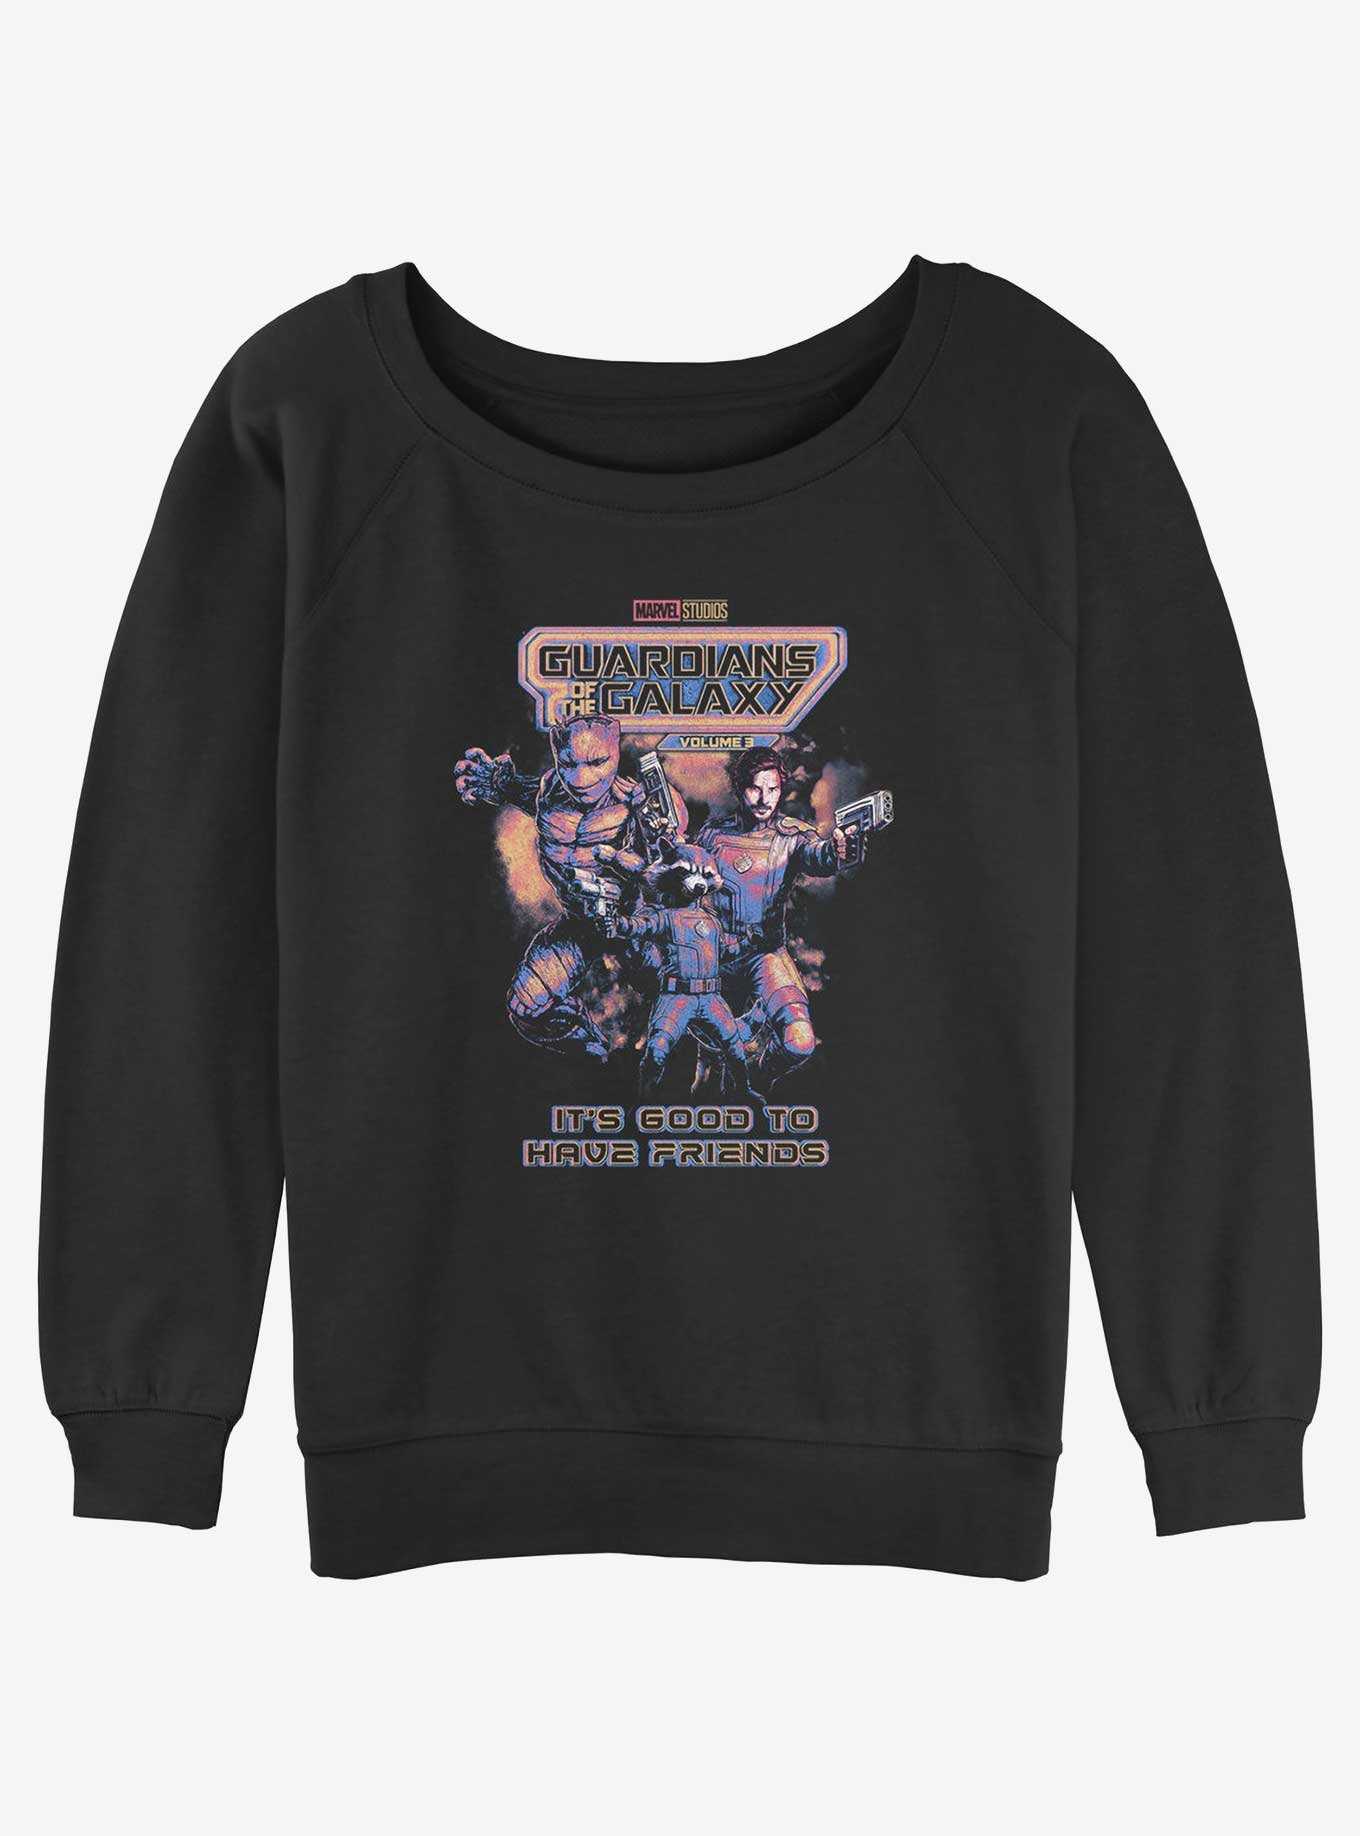 Marvel Guardians of the Galaxy Vol. 3 It's Good To Have Friends Poster Womens Slouchy Sweatshirt, , hi-res